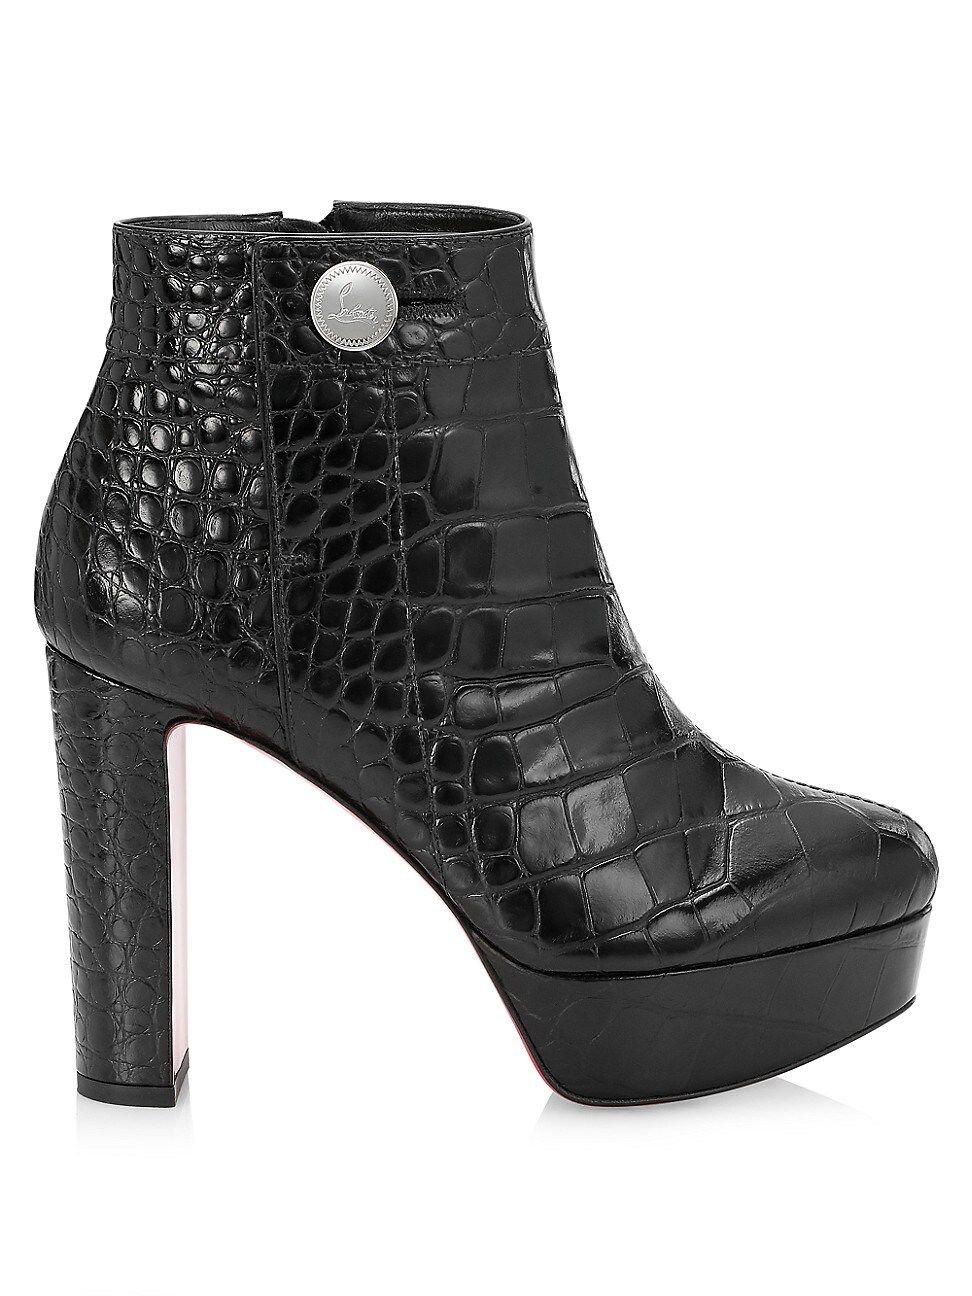 Christian Louboutin Janis Croc-Embossed Leather Platform Ankle Boots | Saks Fifth Avenue